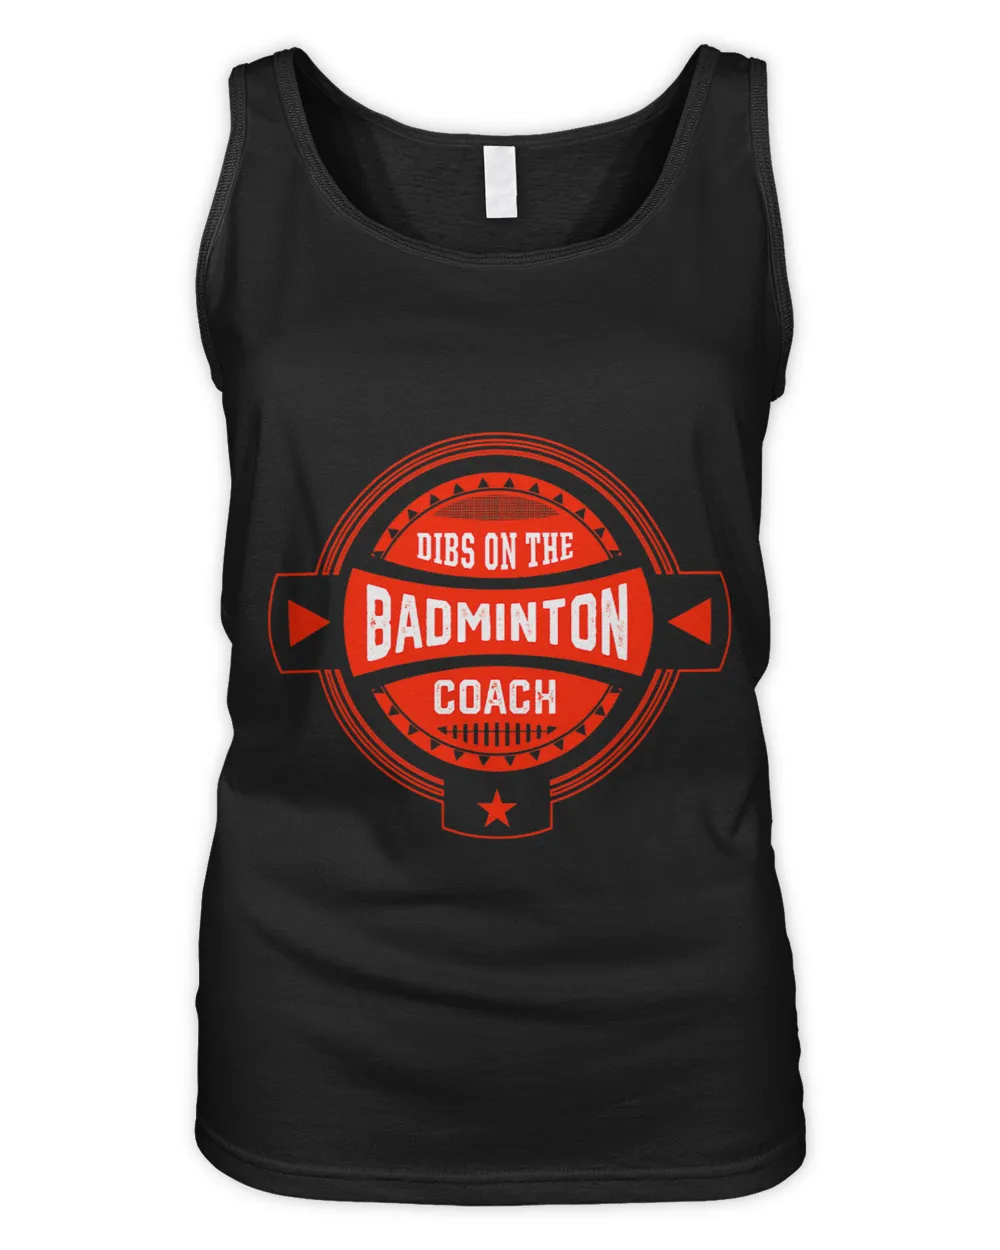 Dibs on the Badminton Coach Sayings Badminton Player Quotes